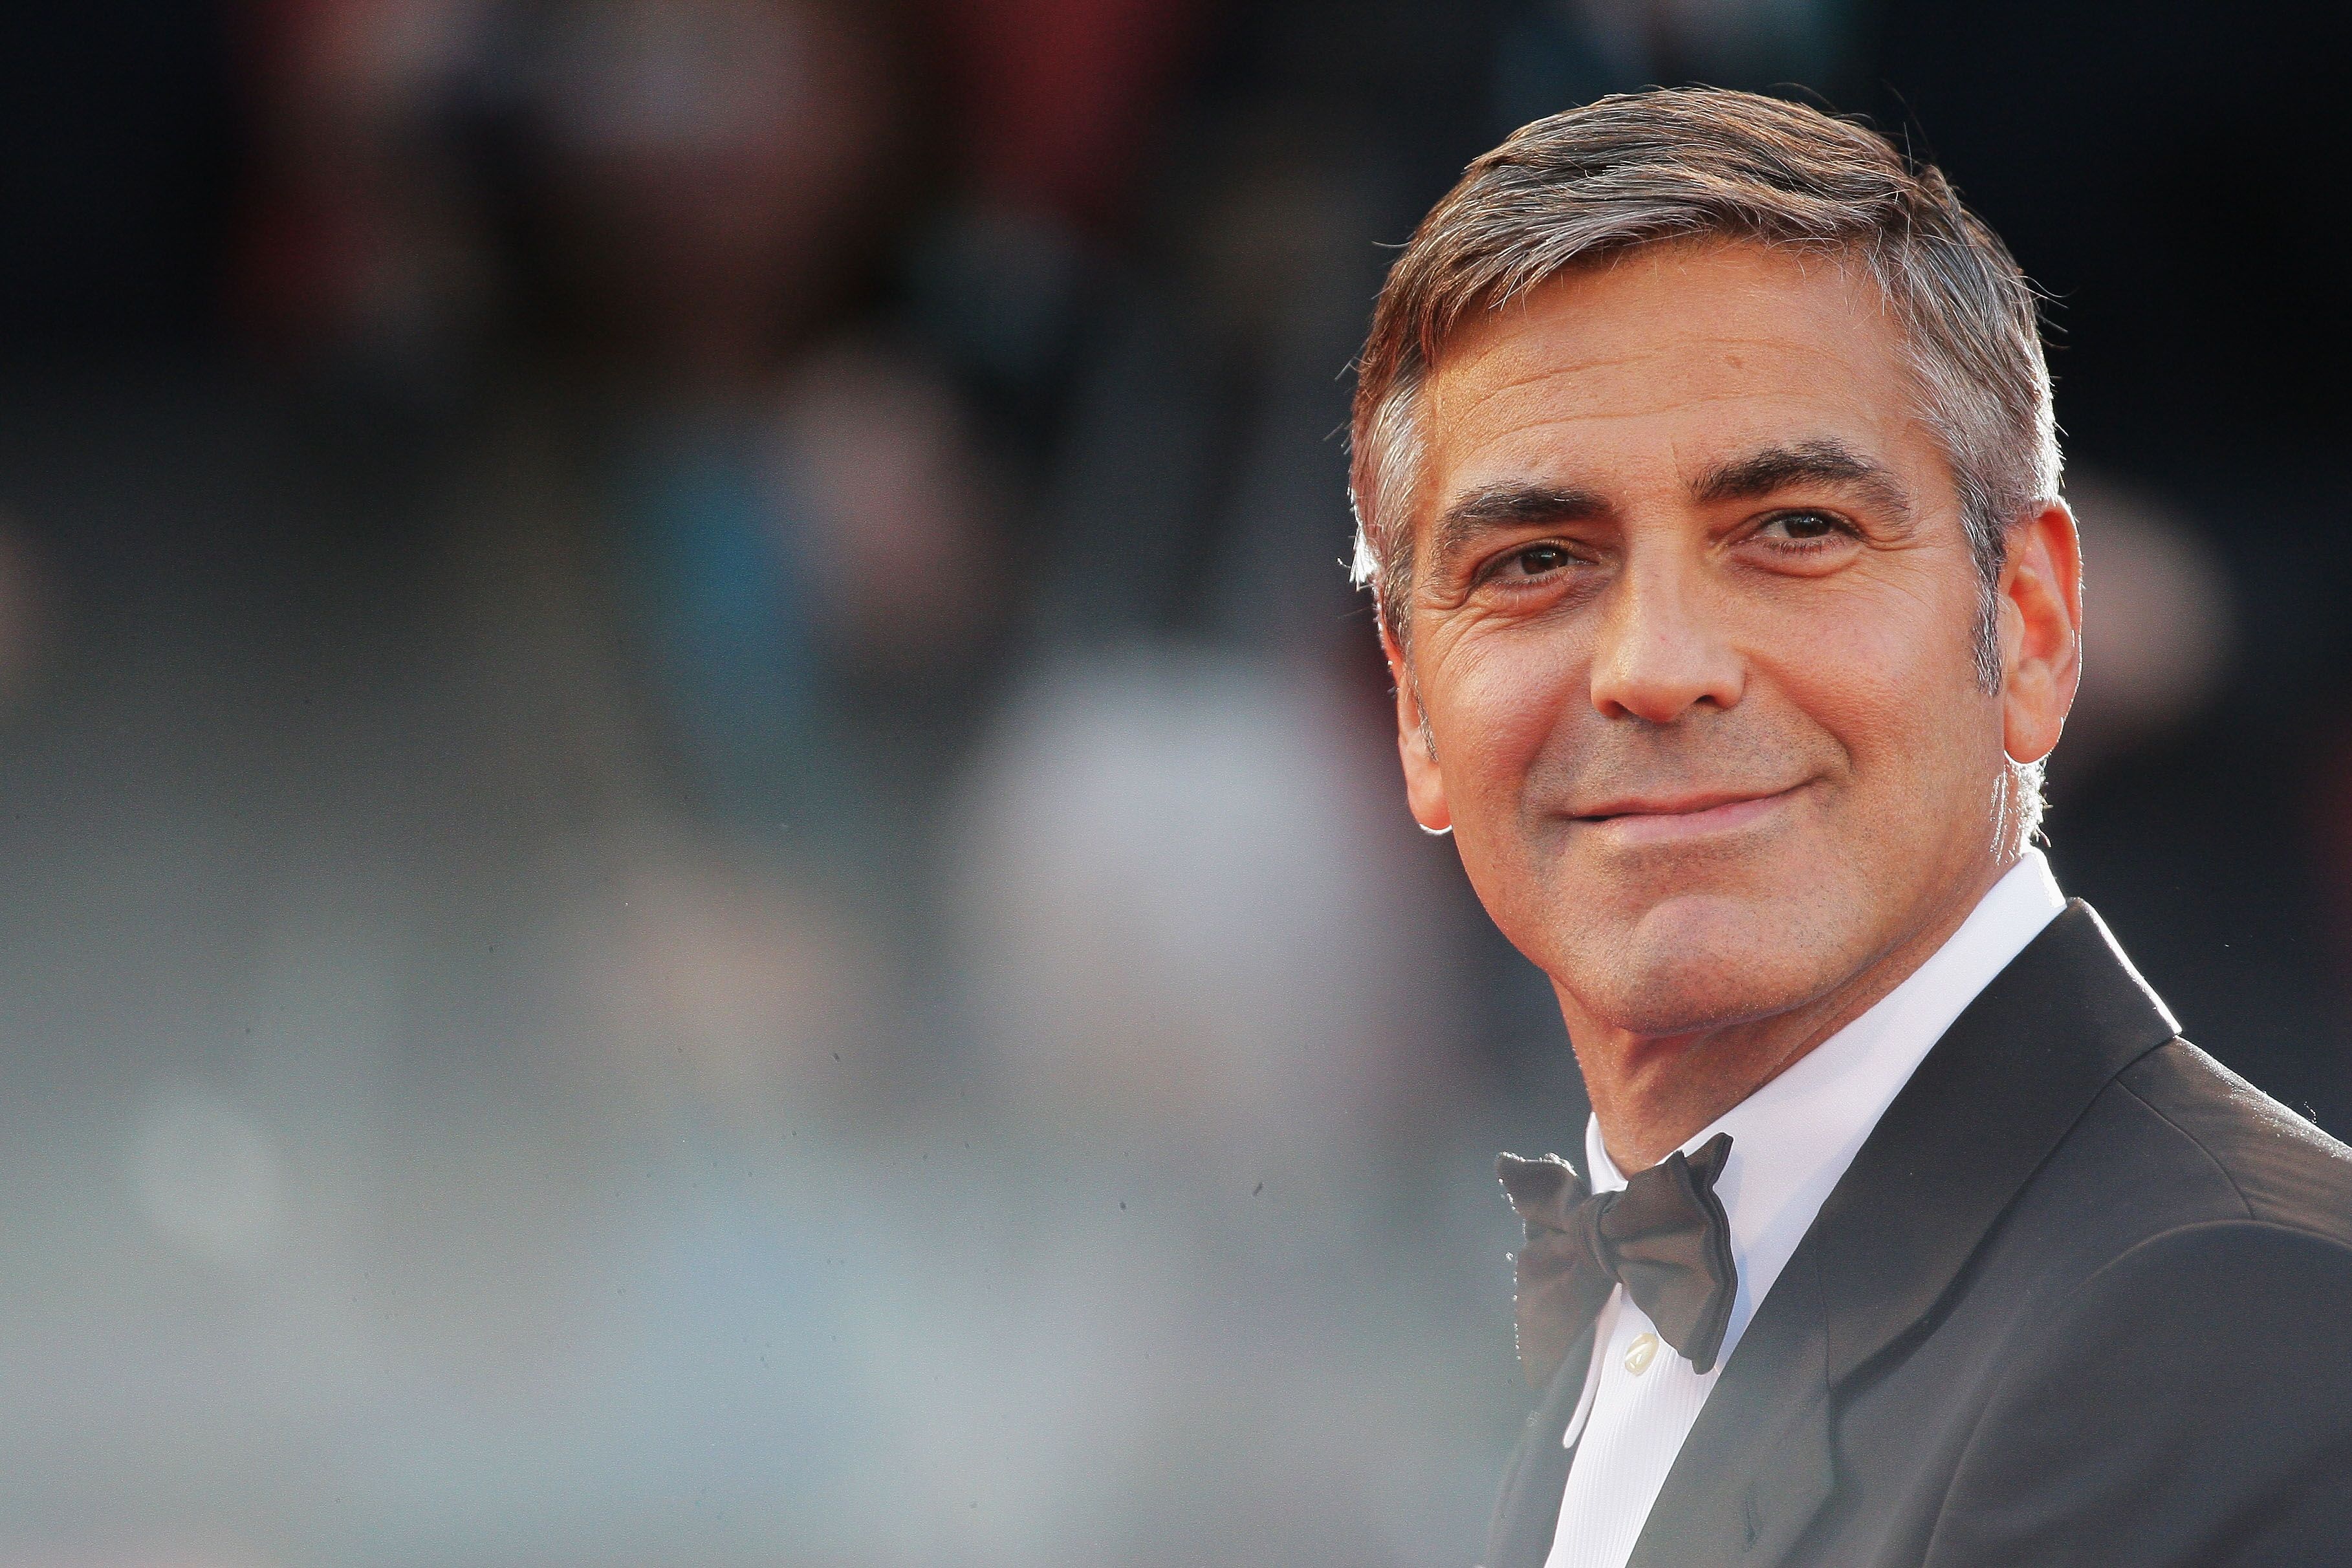 George Clooney at "The Men Who Stare At Goats" premiere at the Sala Grande during the 66th Venice Film Festival in 2009. | Photo: Getty Images